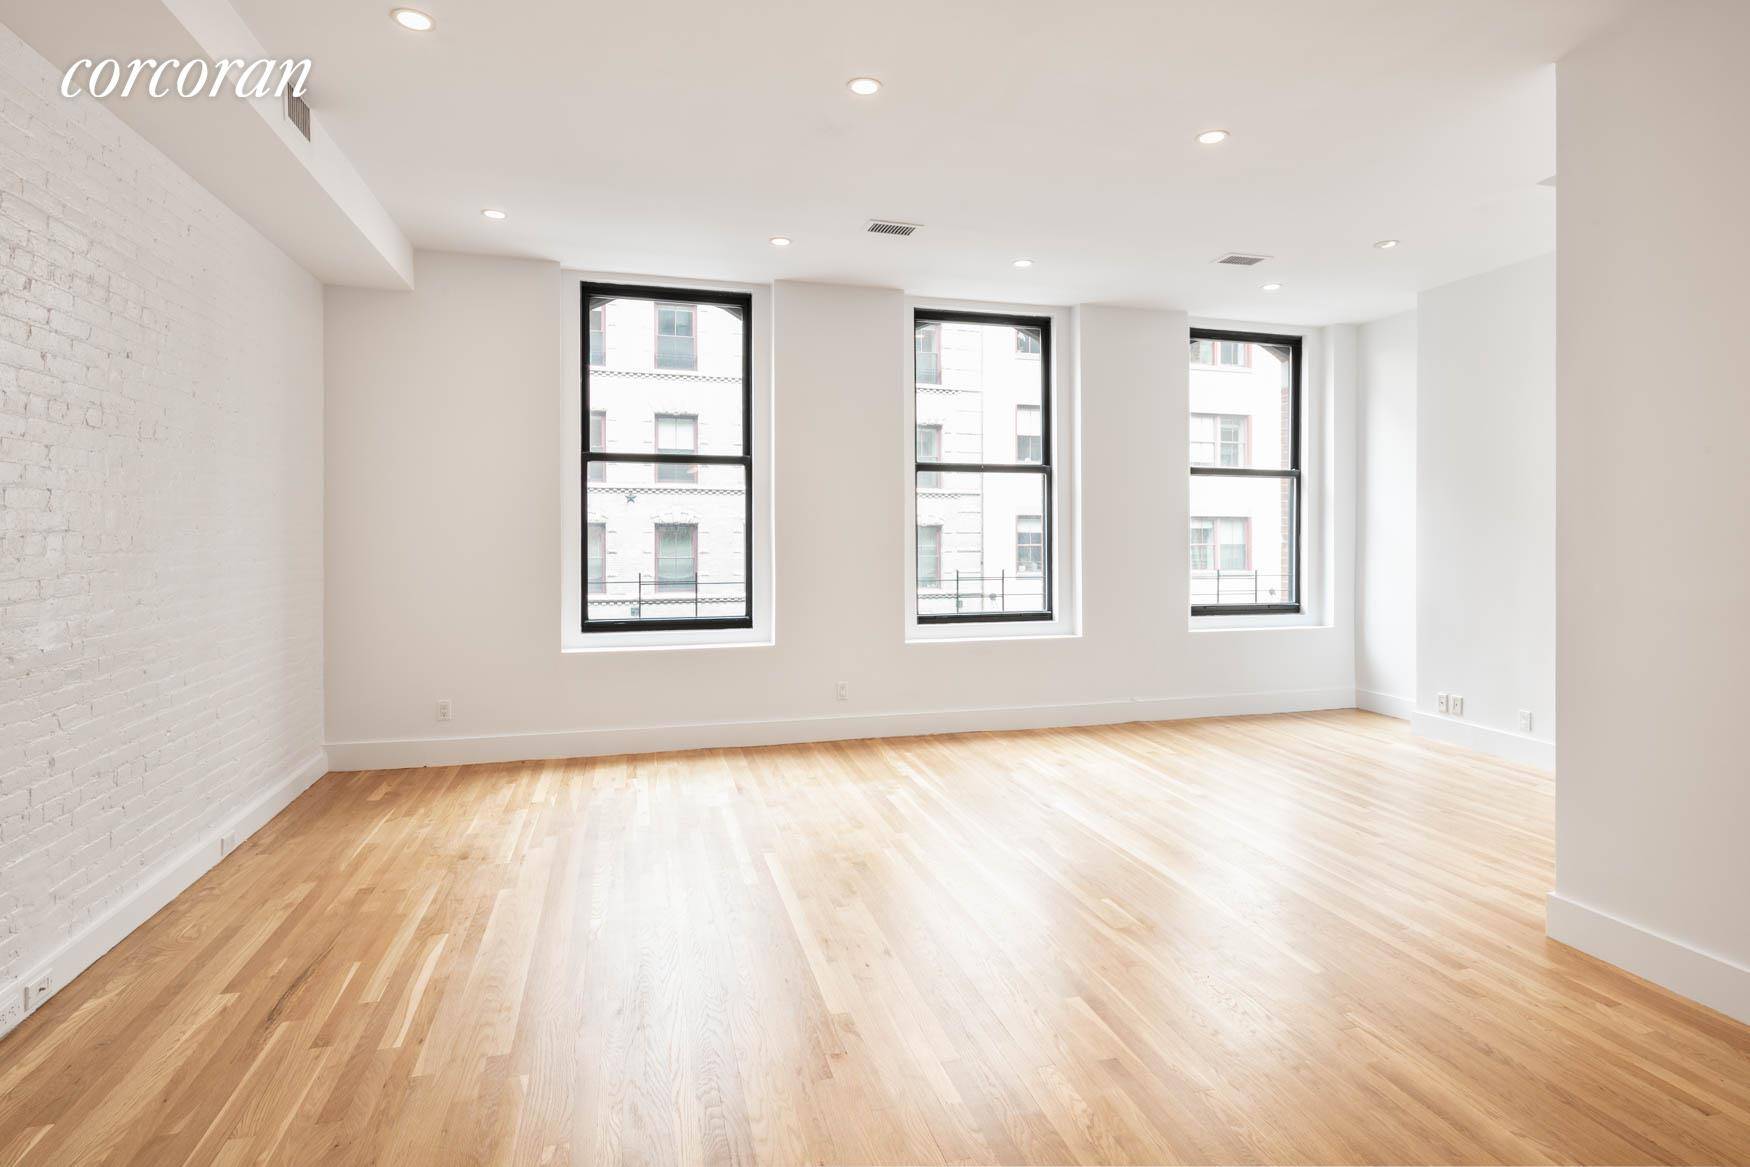 An authentic full floor loft in a boutique Tribeca condominium building, this two bedroom, two bathroom plus home office residence offers the ideal combination of old world details and modern ...